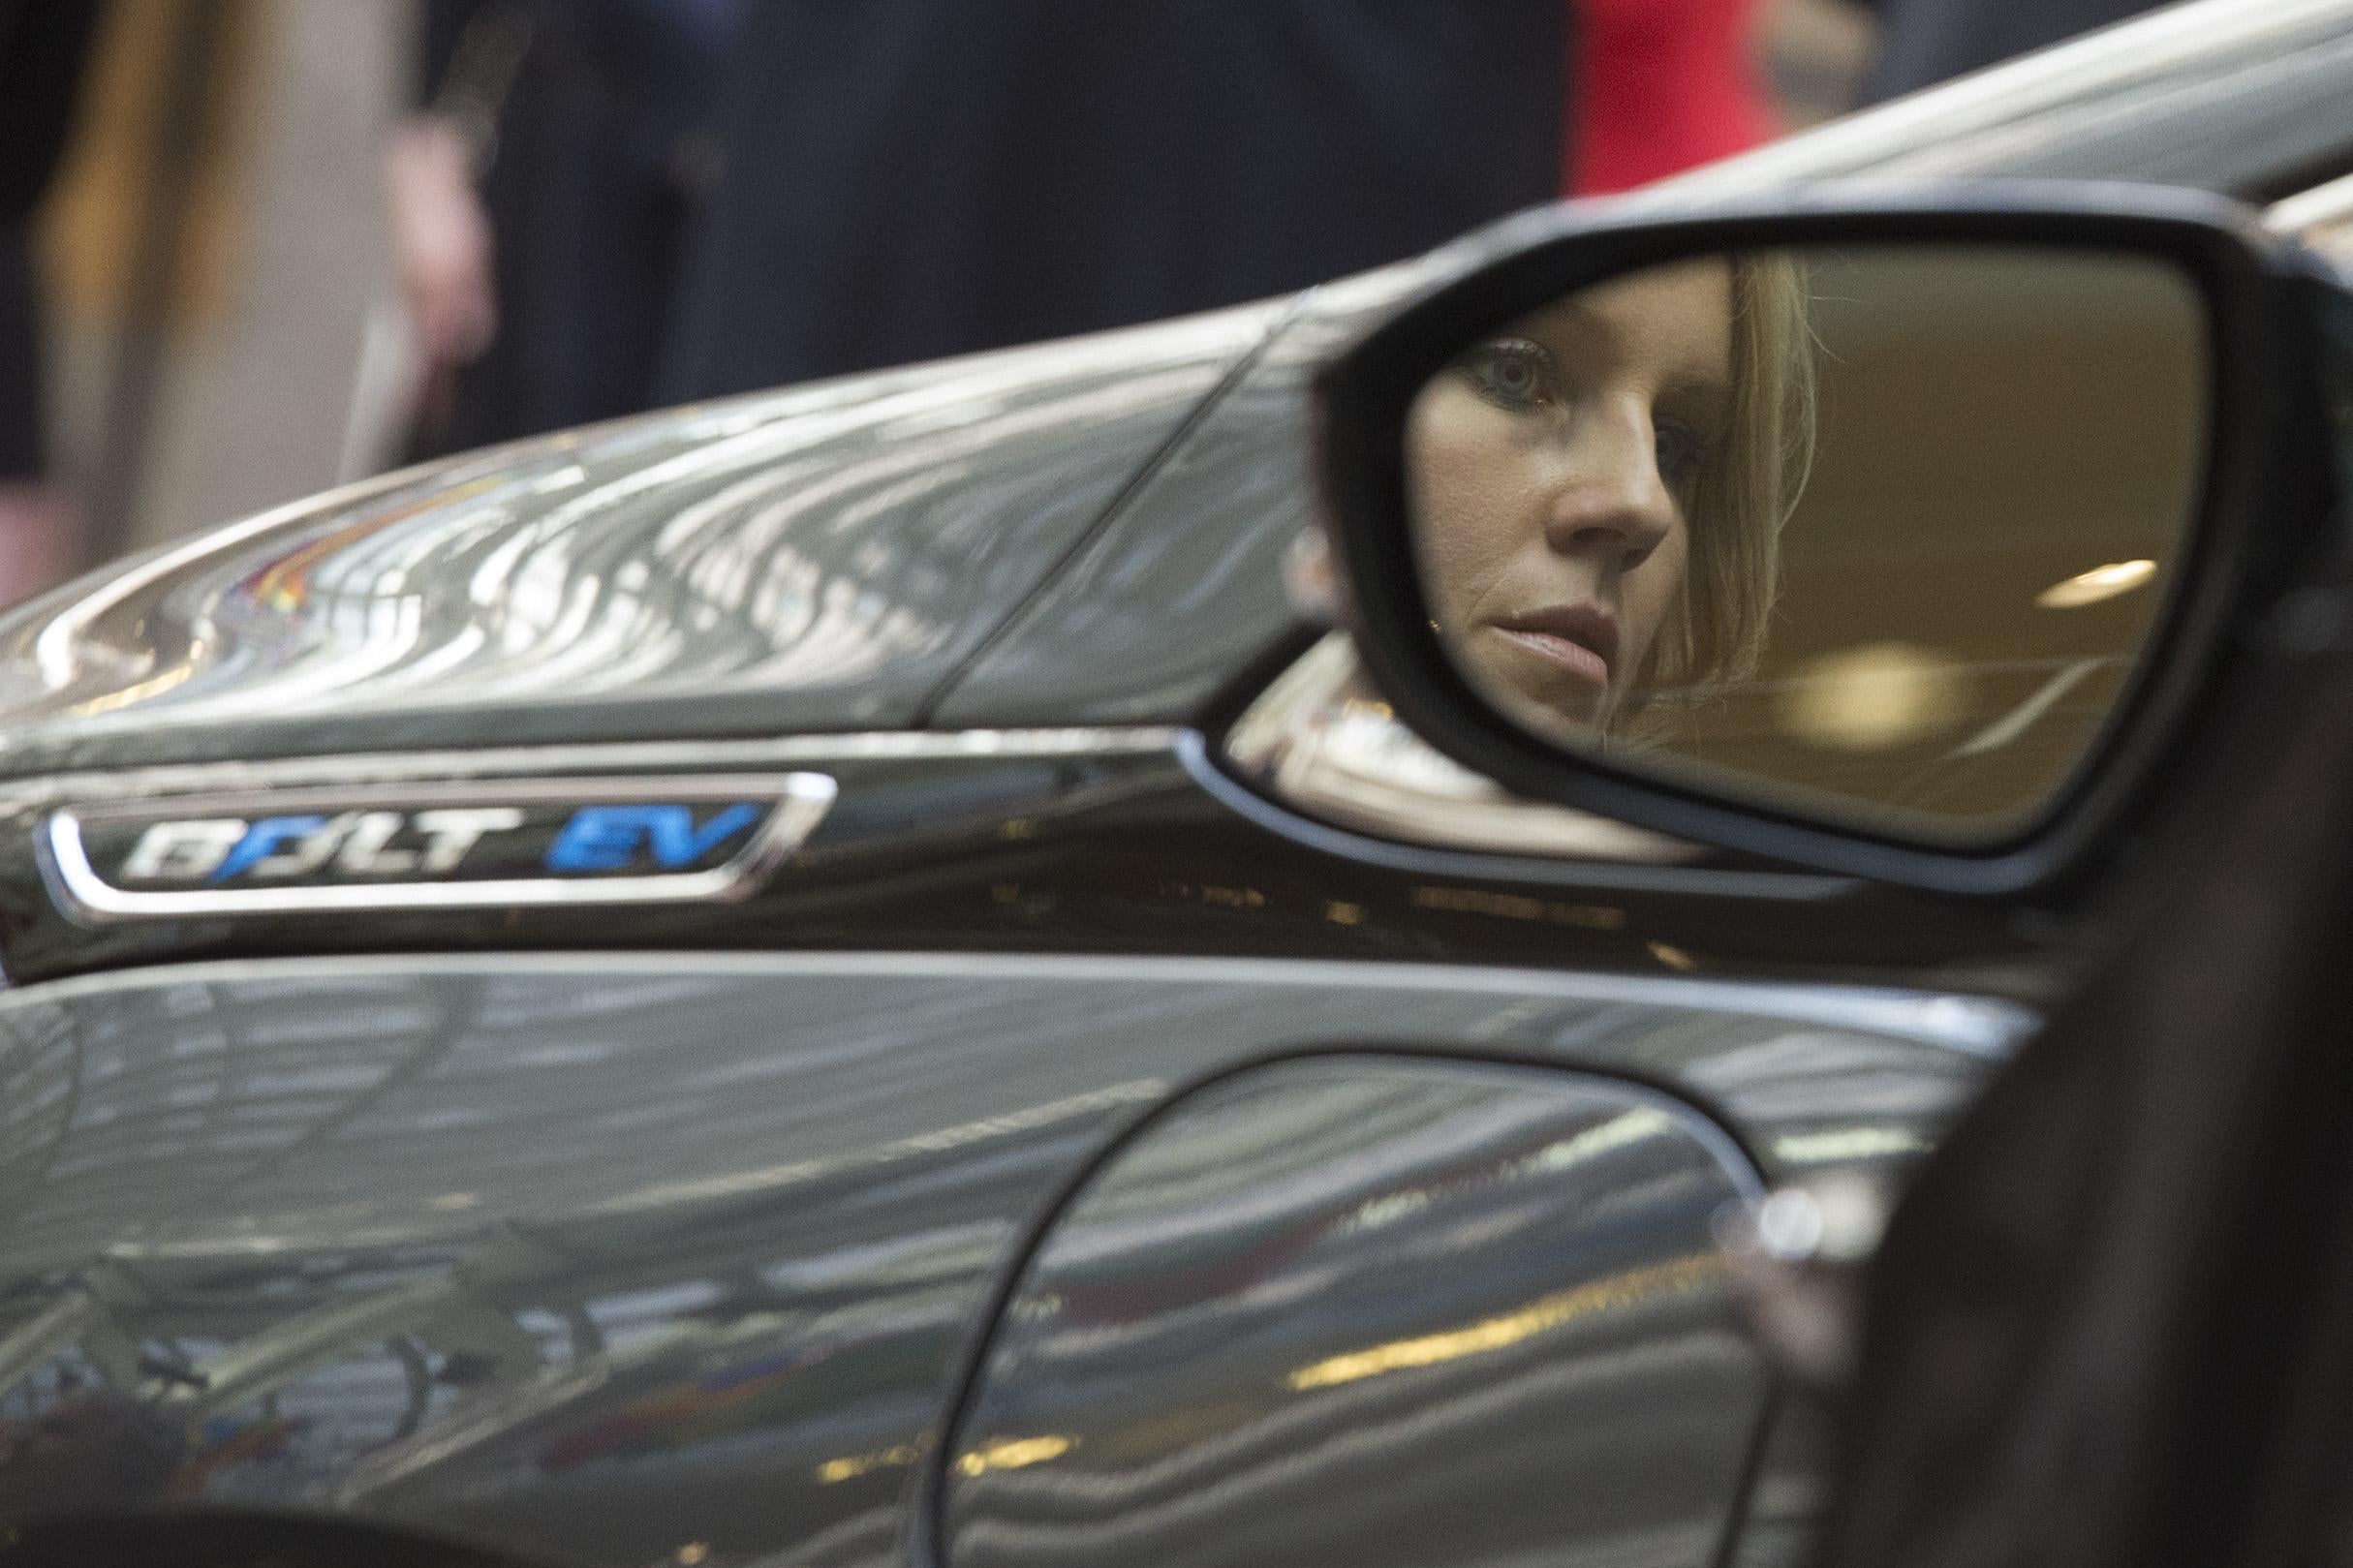 A woman's face appears in a driver's side mirror, against a Chevy Bolt in the background.t.